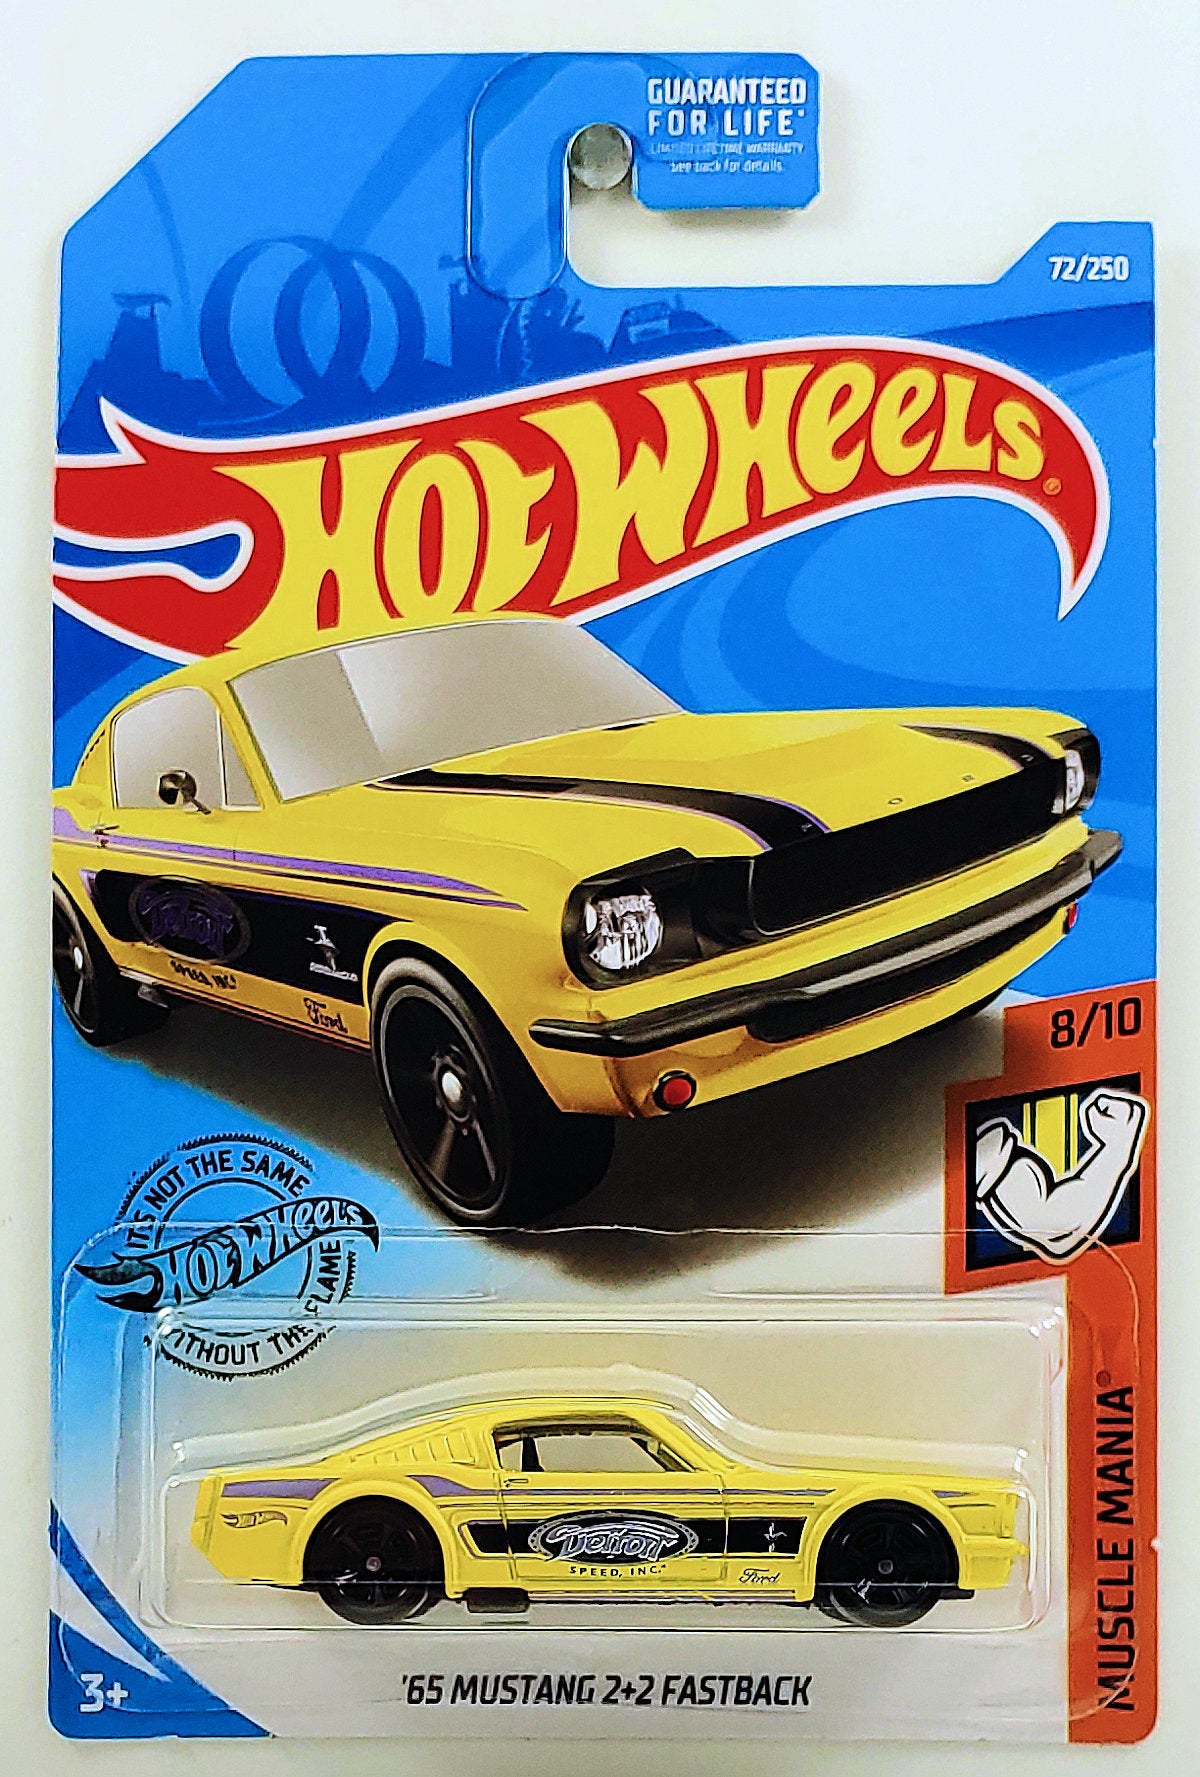 Hot Wheels 2019 - Collector # 072/250 - '65 Mustang 2+2 Fastback